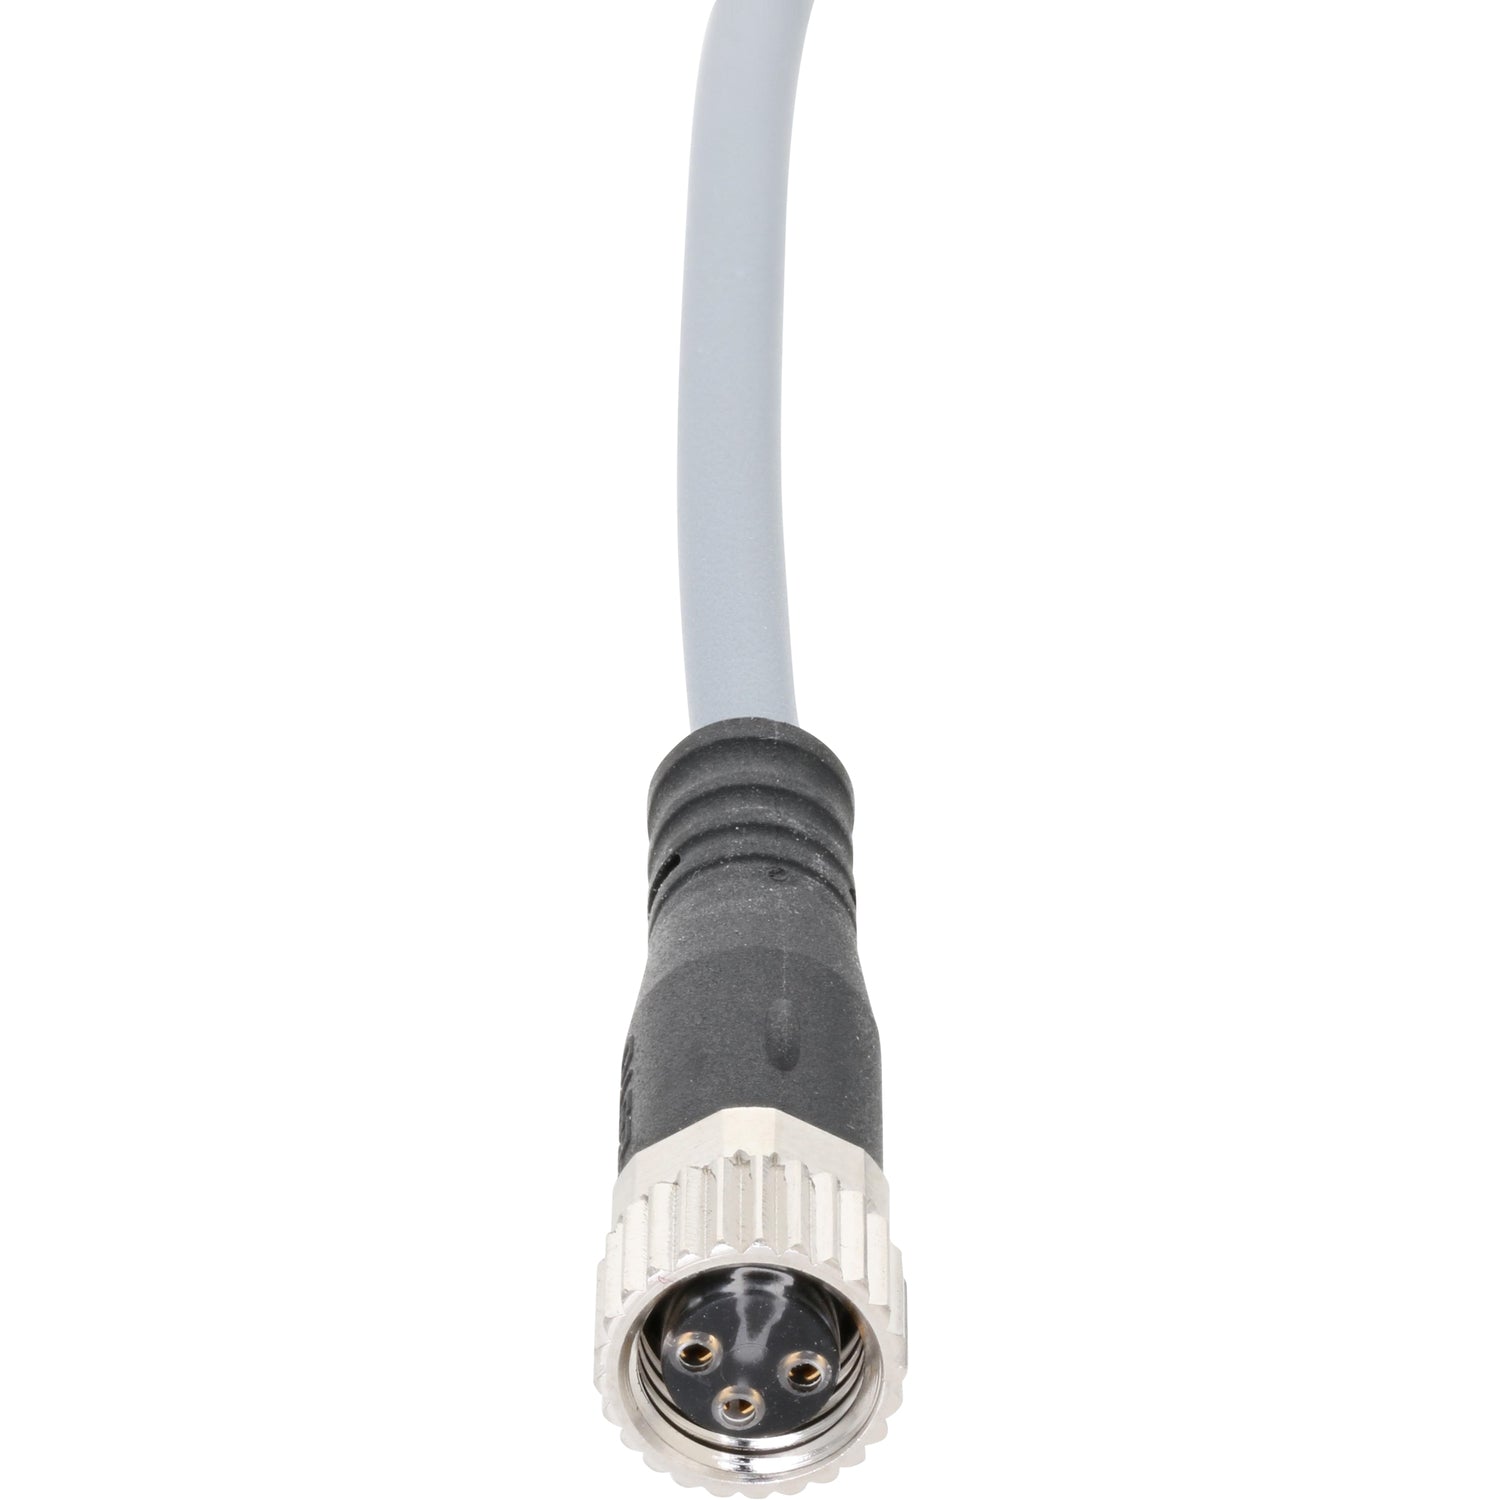 Grey connecting cable with molded black rubber and nickel plated steel female plug showing. Sensor cable is shown on a white back ground. 539052